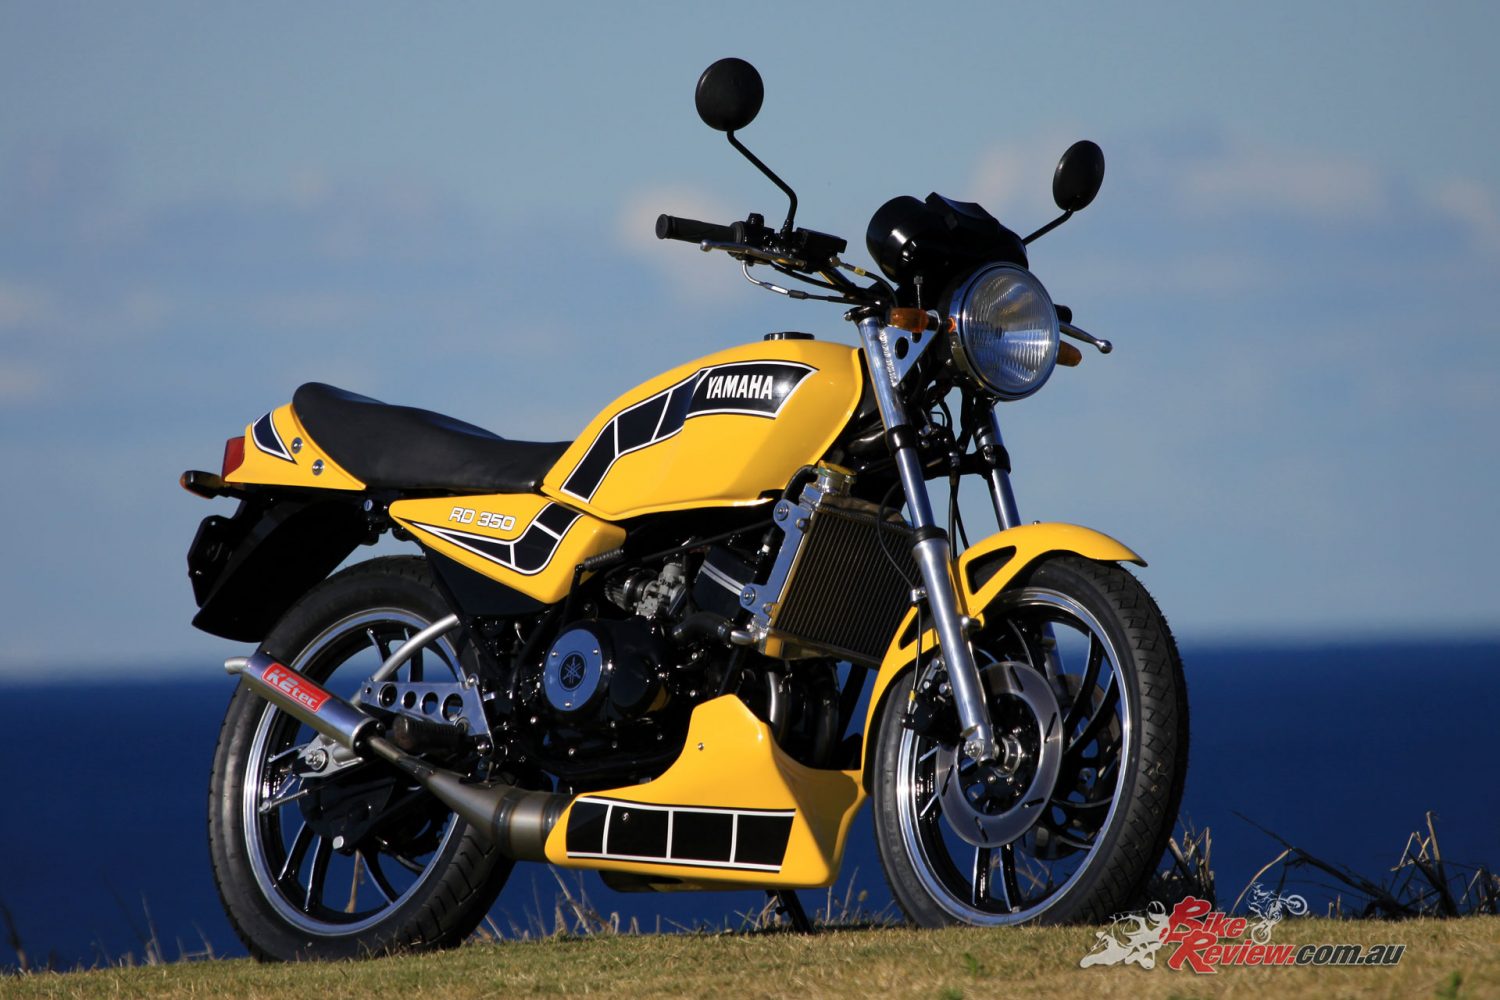 The end result is a breathtaking offering in the Kenny Roberts colours.